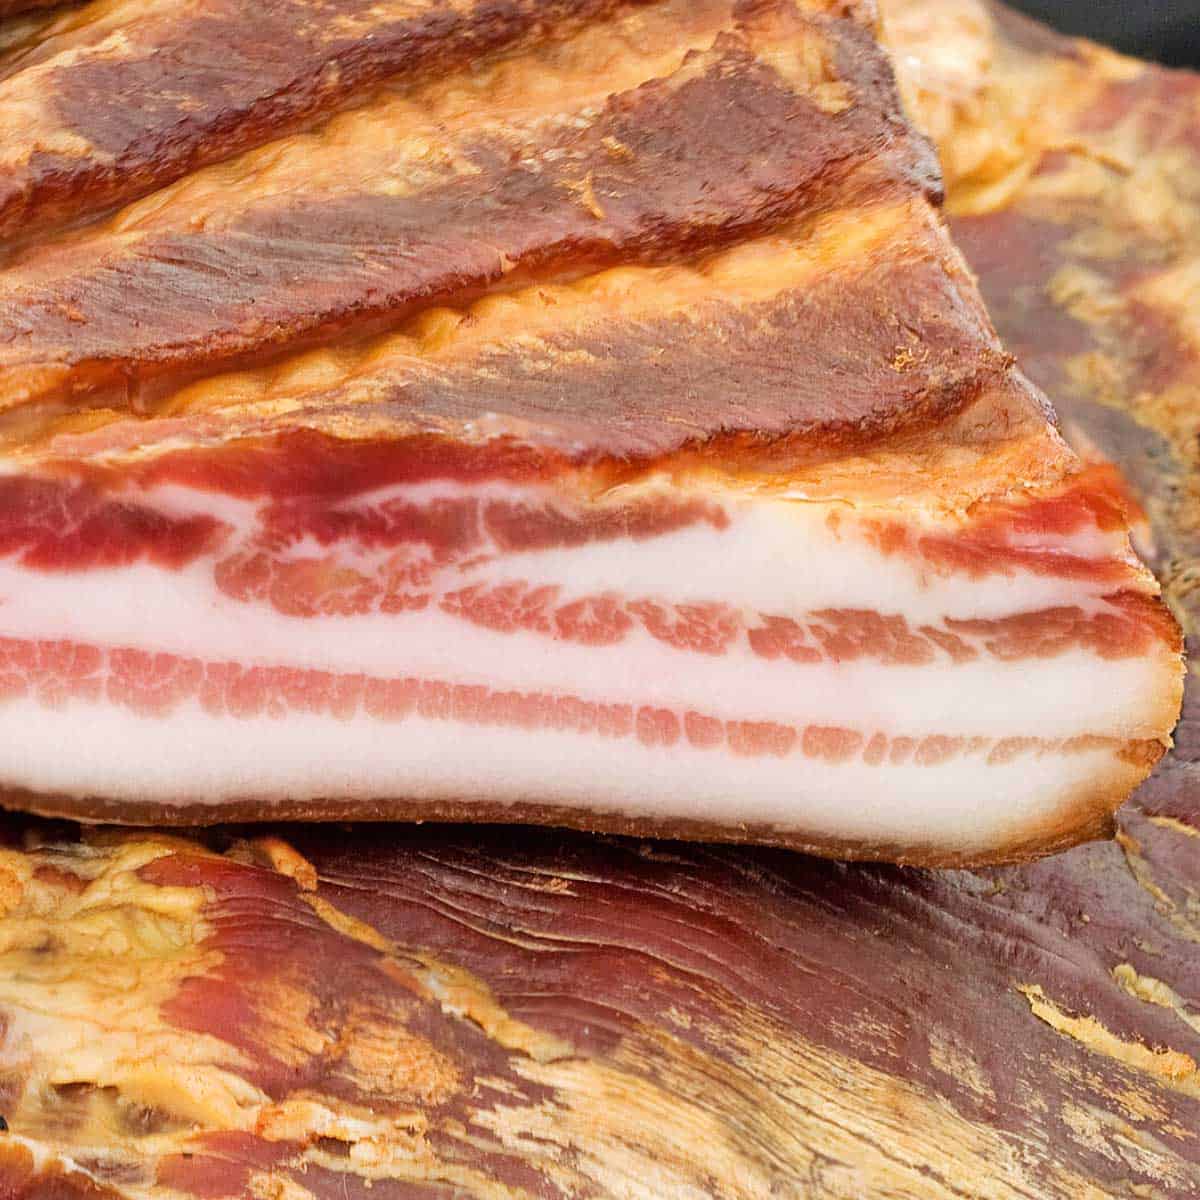 A cut slab of cured smoked bacon resting on top of an uncut bacon slab.